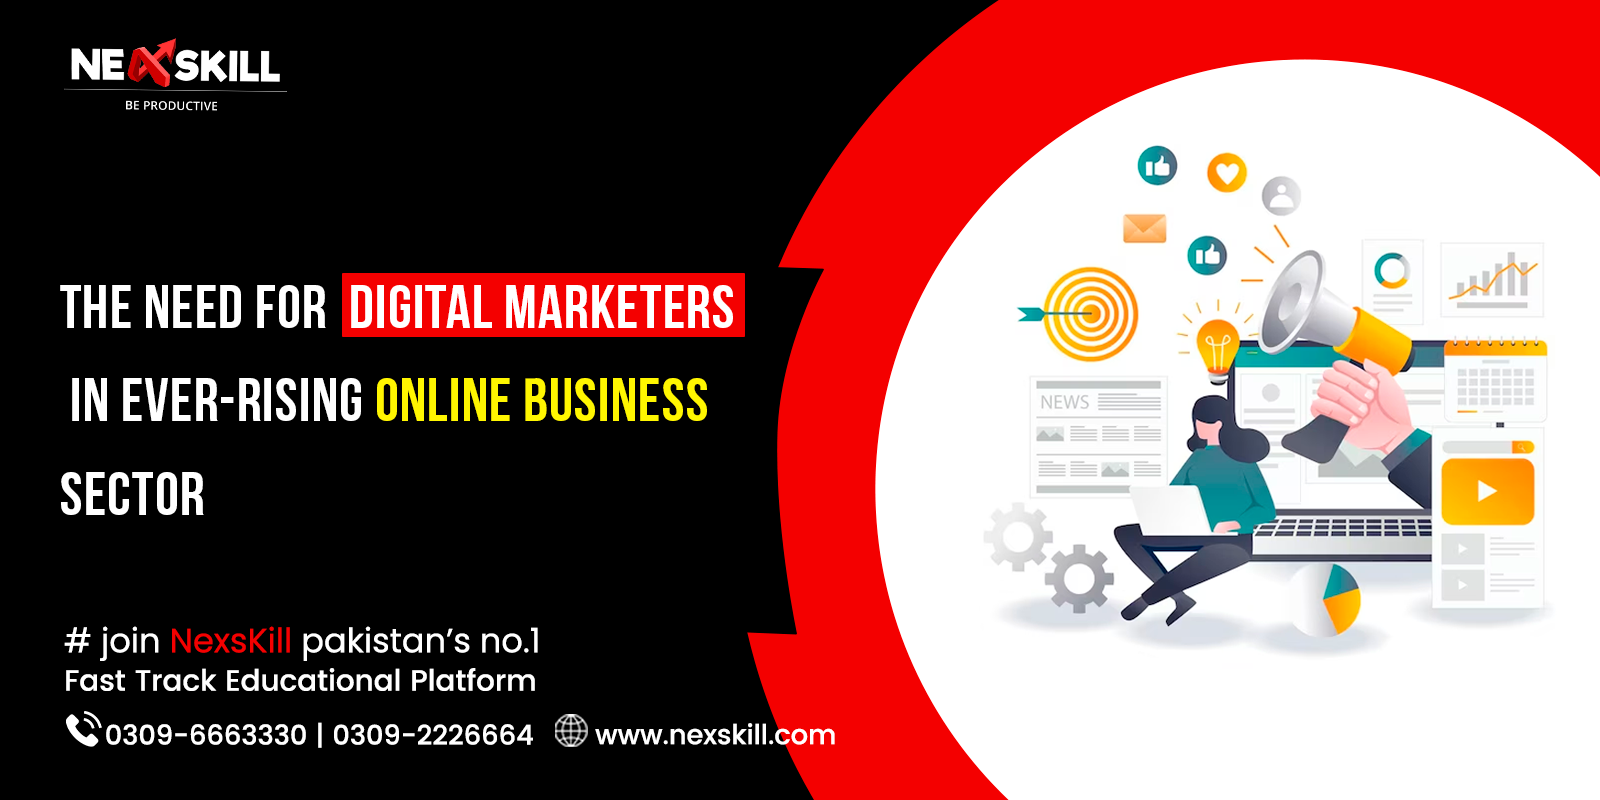 The Need for Digital Marketers in Ever-Rising Online Business Sector